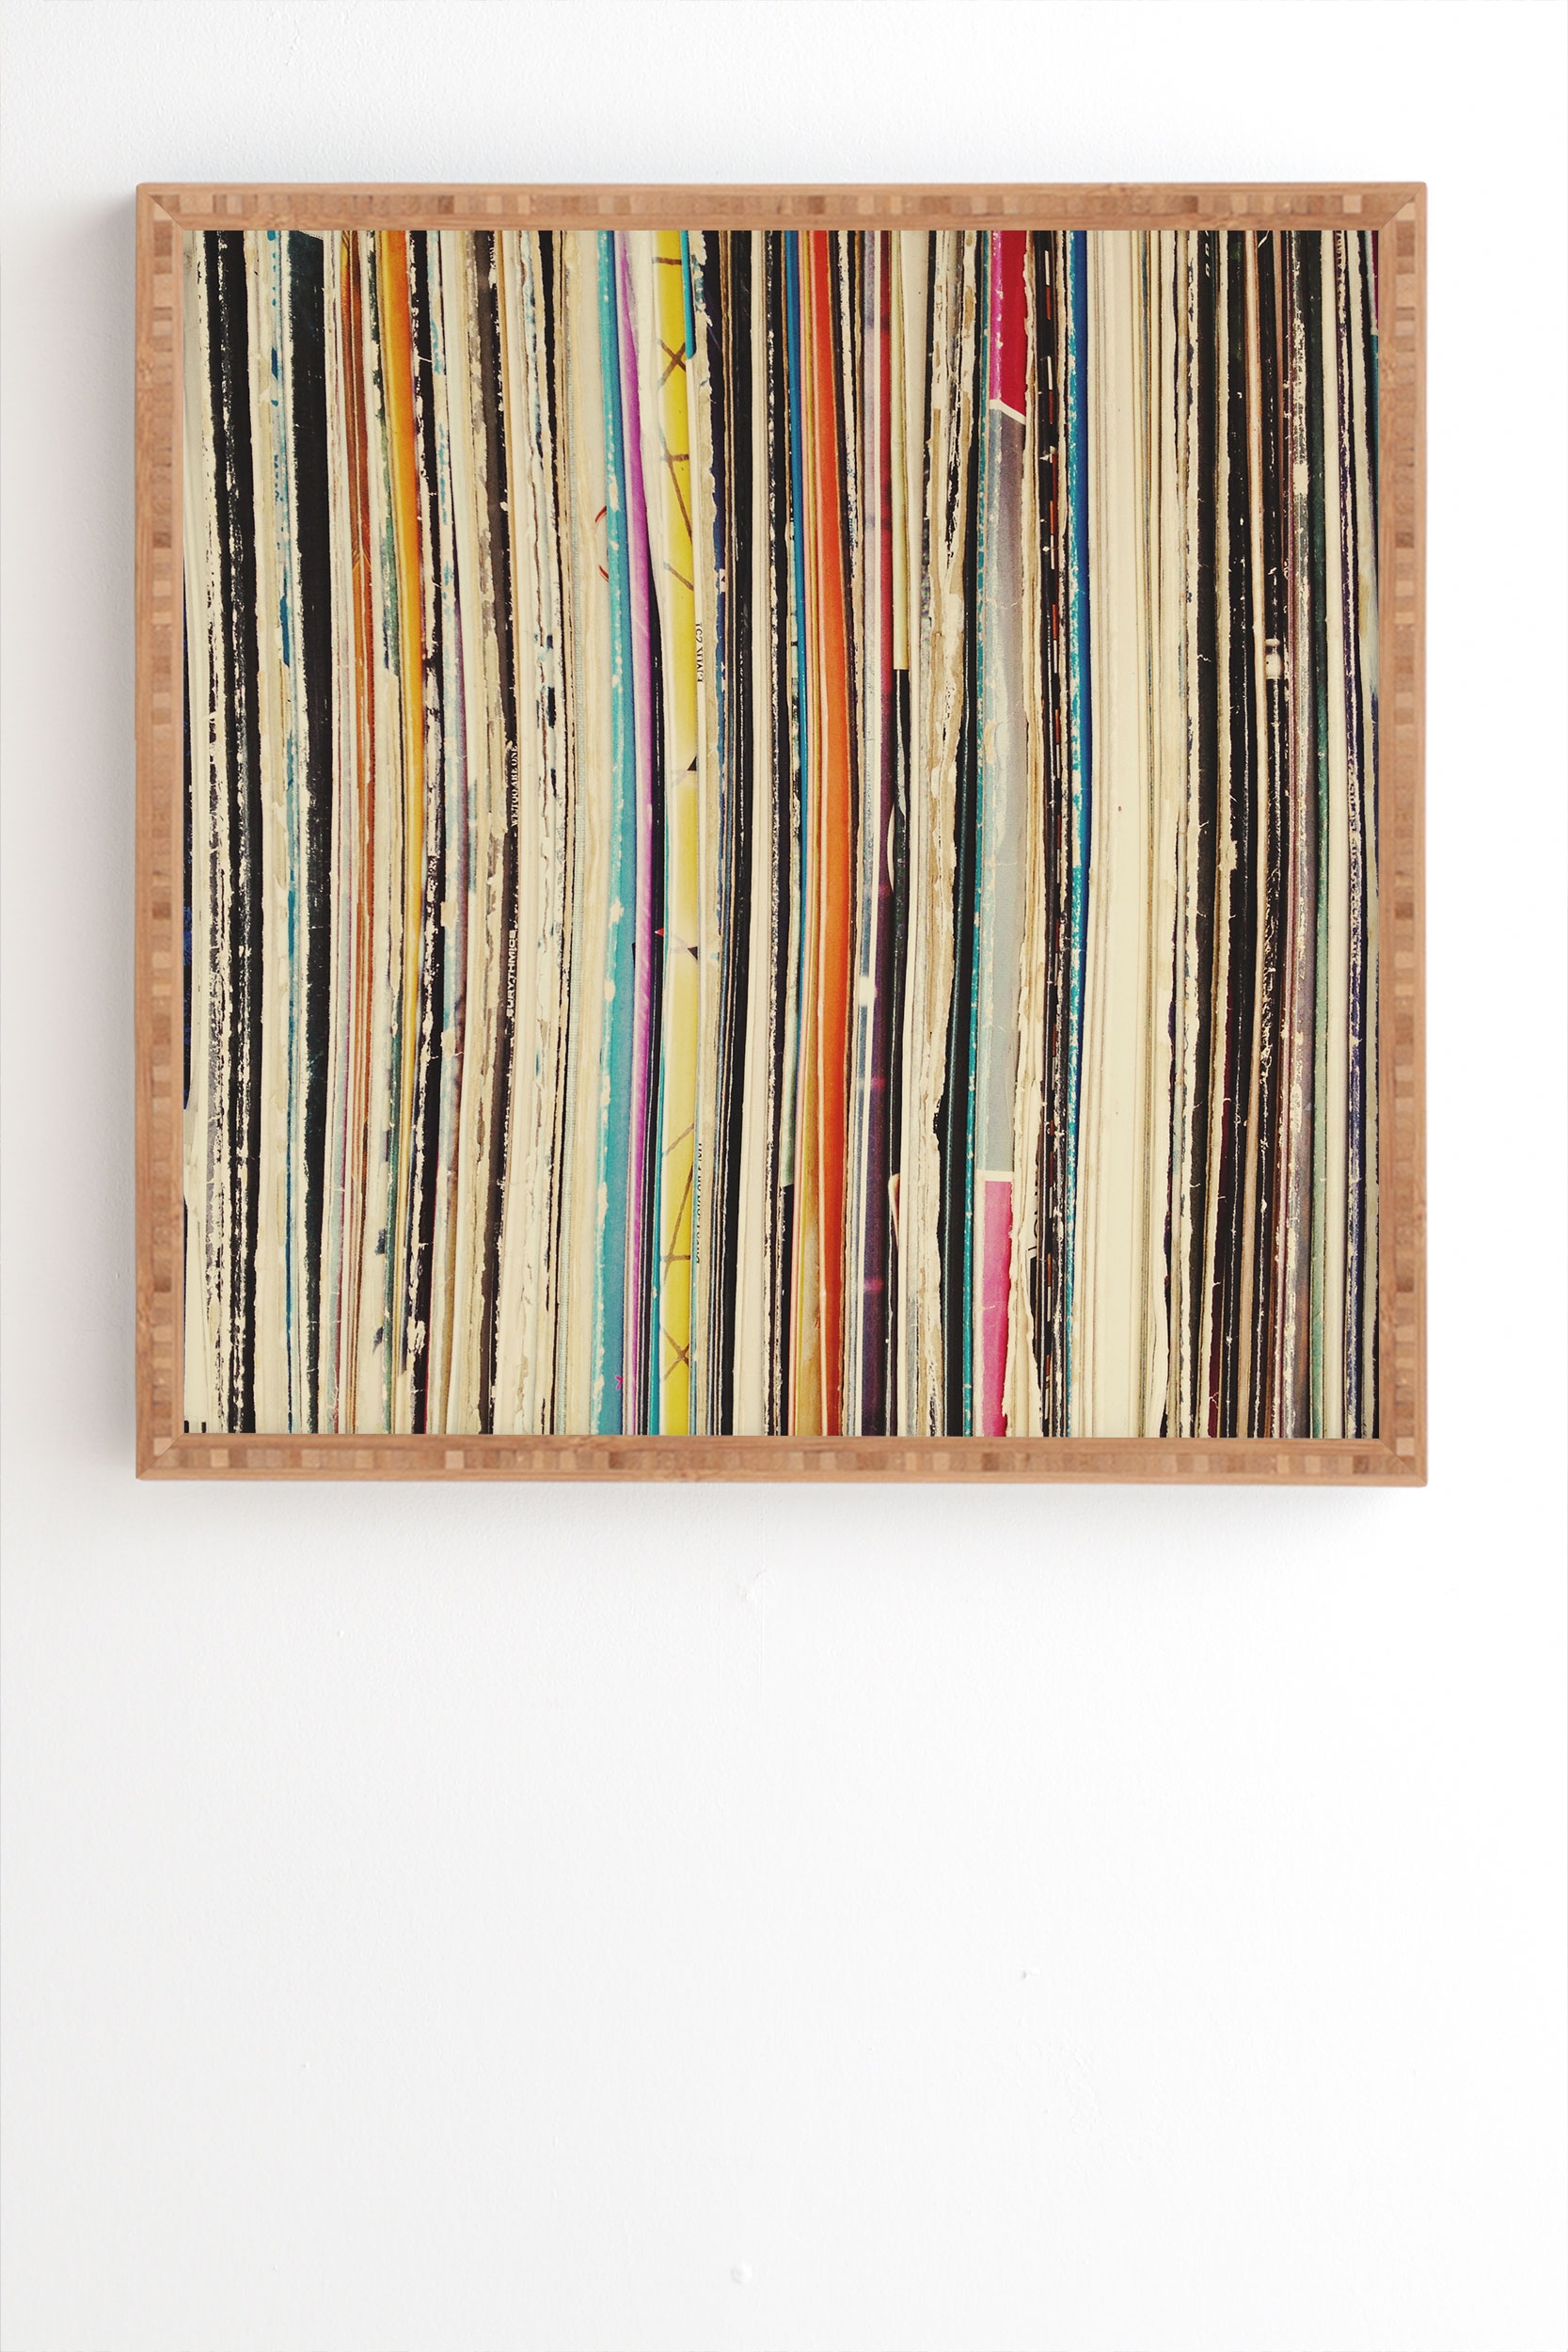 Record Collection by Cassia Beck - Framed Wall Art Bamboo 20" x 20" - Image 1